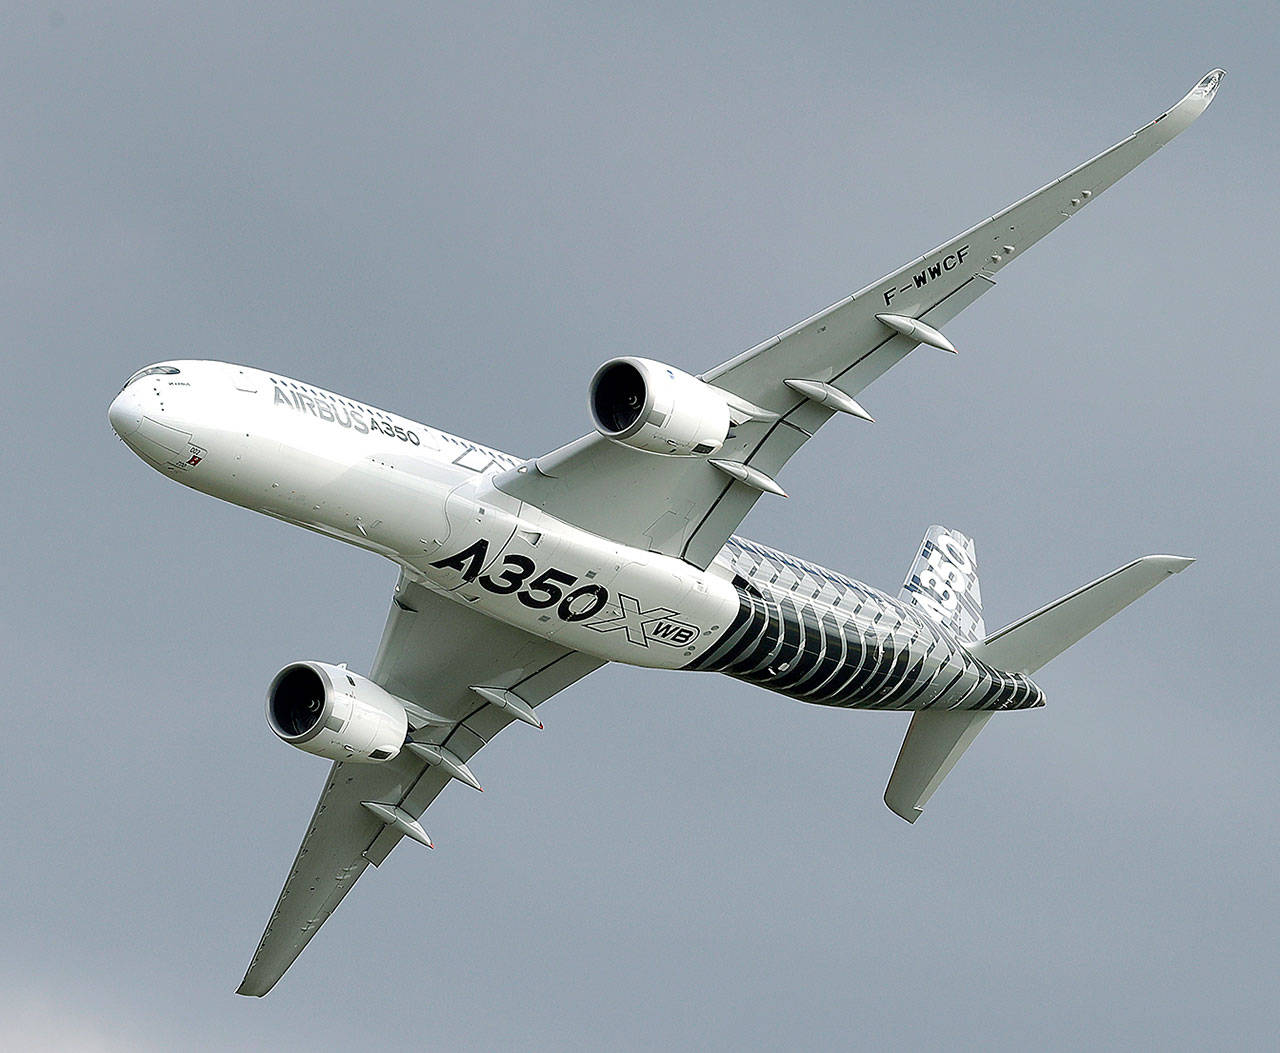 An Airbus A350 flies during the ILA Berlin Air Show in Berlin, Germany, on April 25. Aviation giant Airbus has threatened to leave Britain if the country leaves the European Union without an agreement on future trading. (AP Photo/Michael Sohn, File)